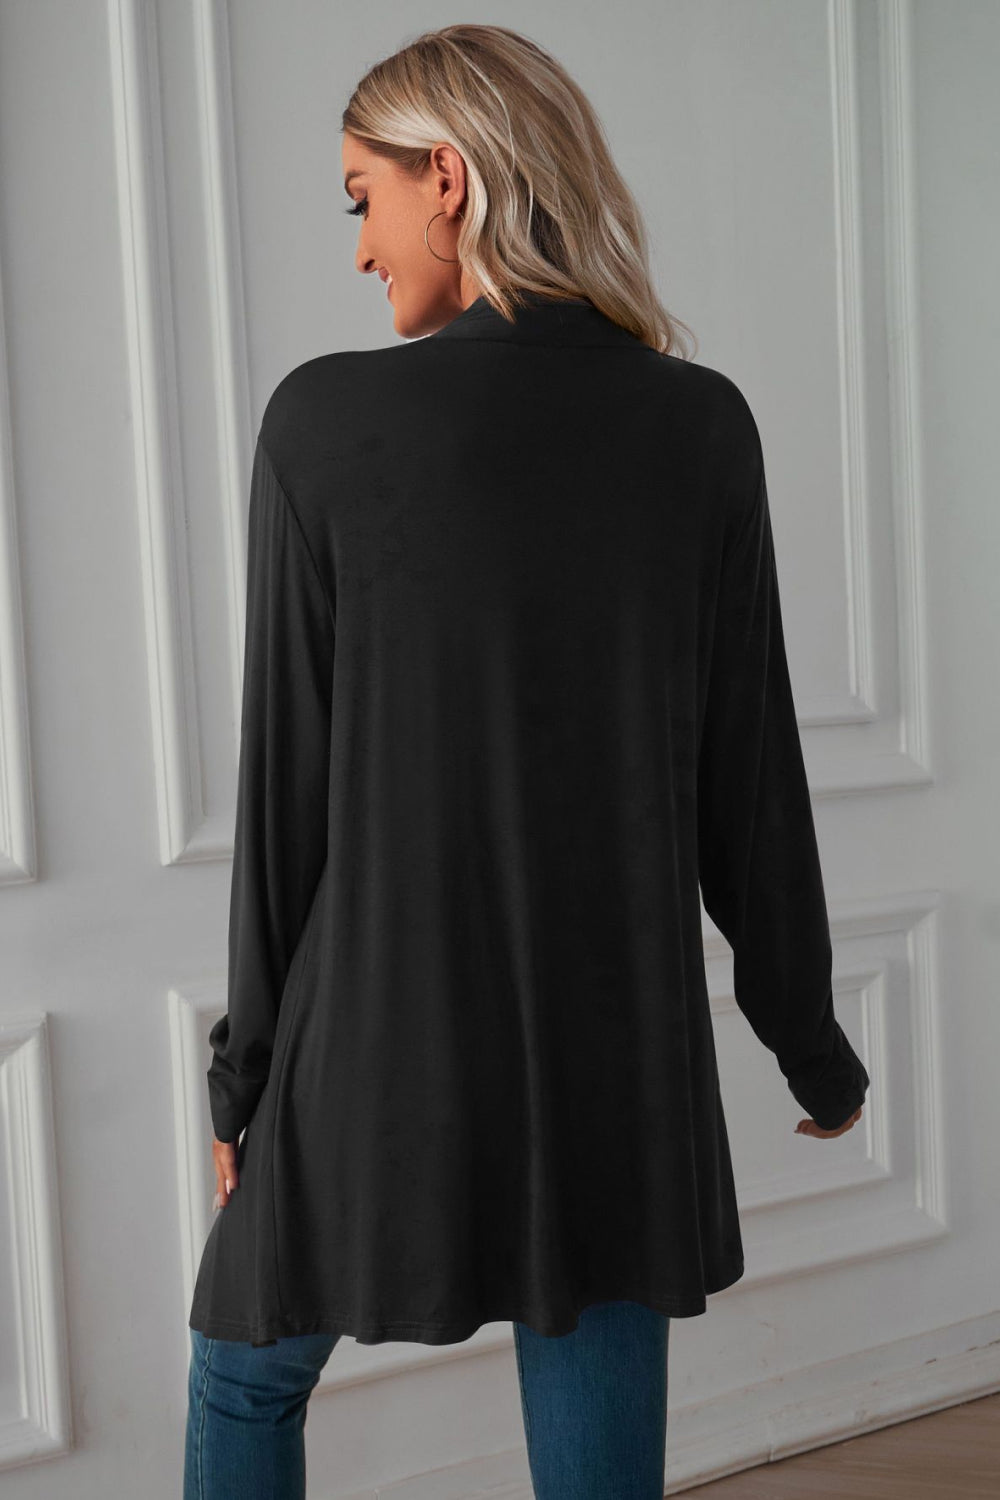 Open Front Long Sleeve Cardigan - Women’s Clothing & Accessories - Shirts & Tops - 16 - 2024